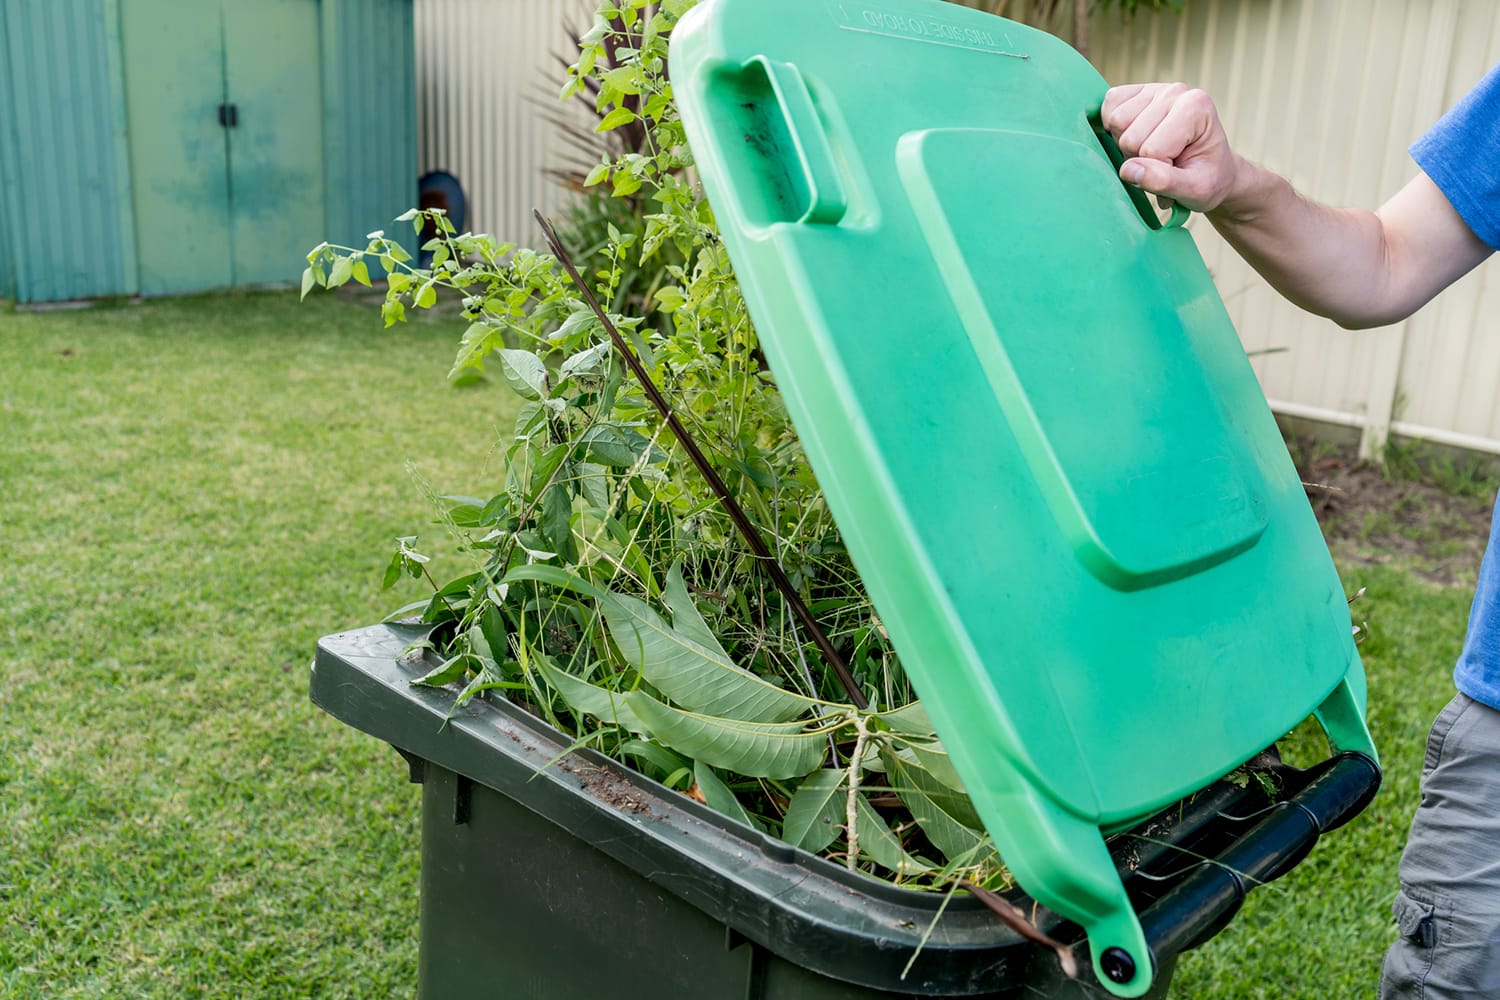 Green waste removal